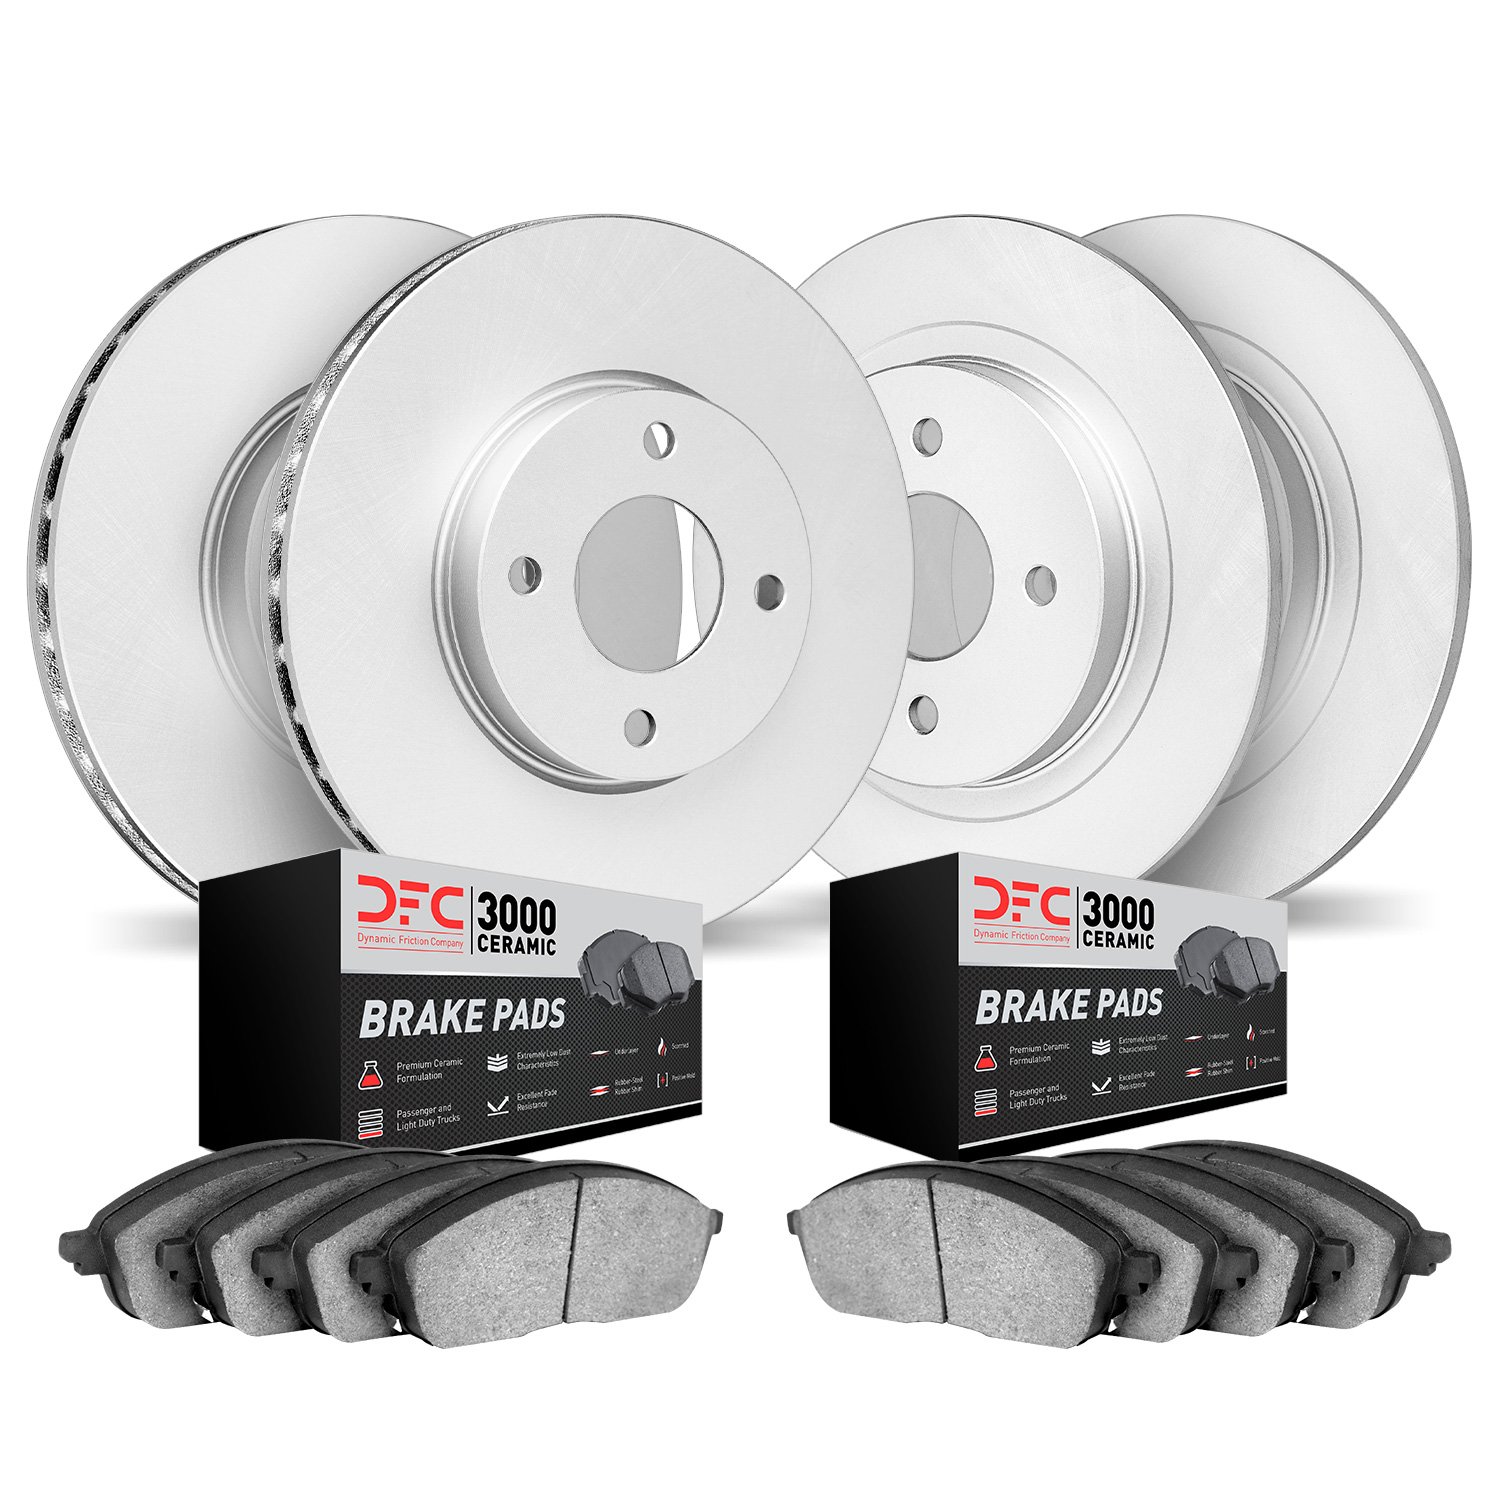 4304-59052 Geospec Brake Rotors with 3000-Series Ceramic Brake Pads Kit, 1998-2002 Acura/Honda, Position: Front and Rear